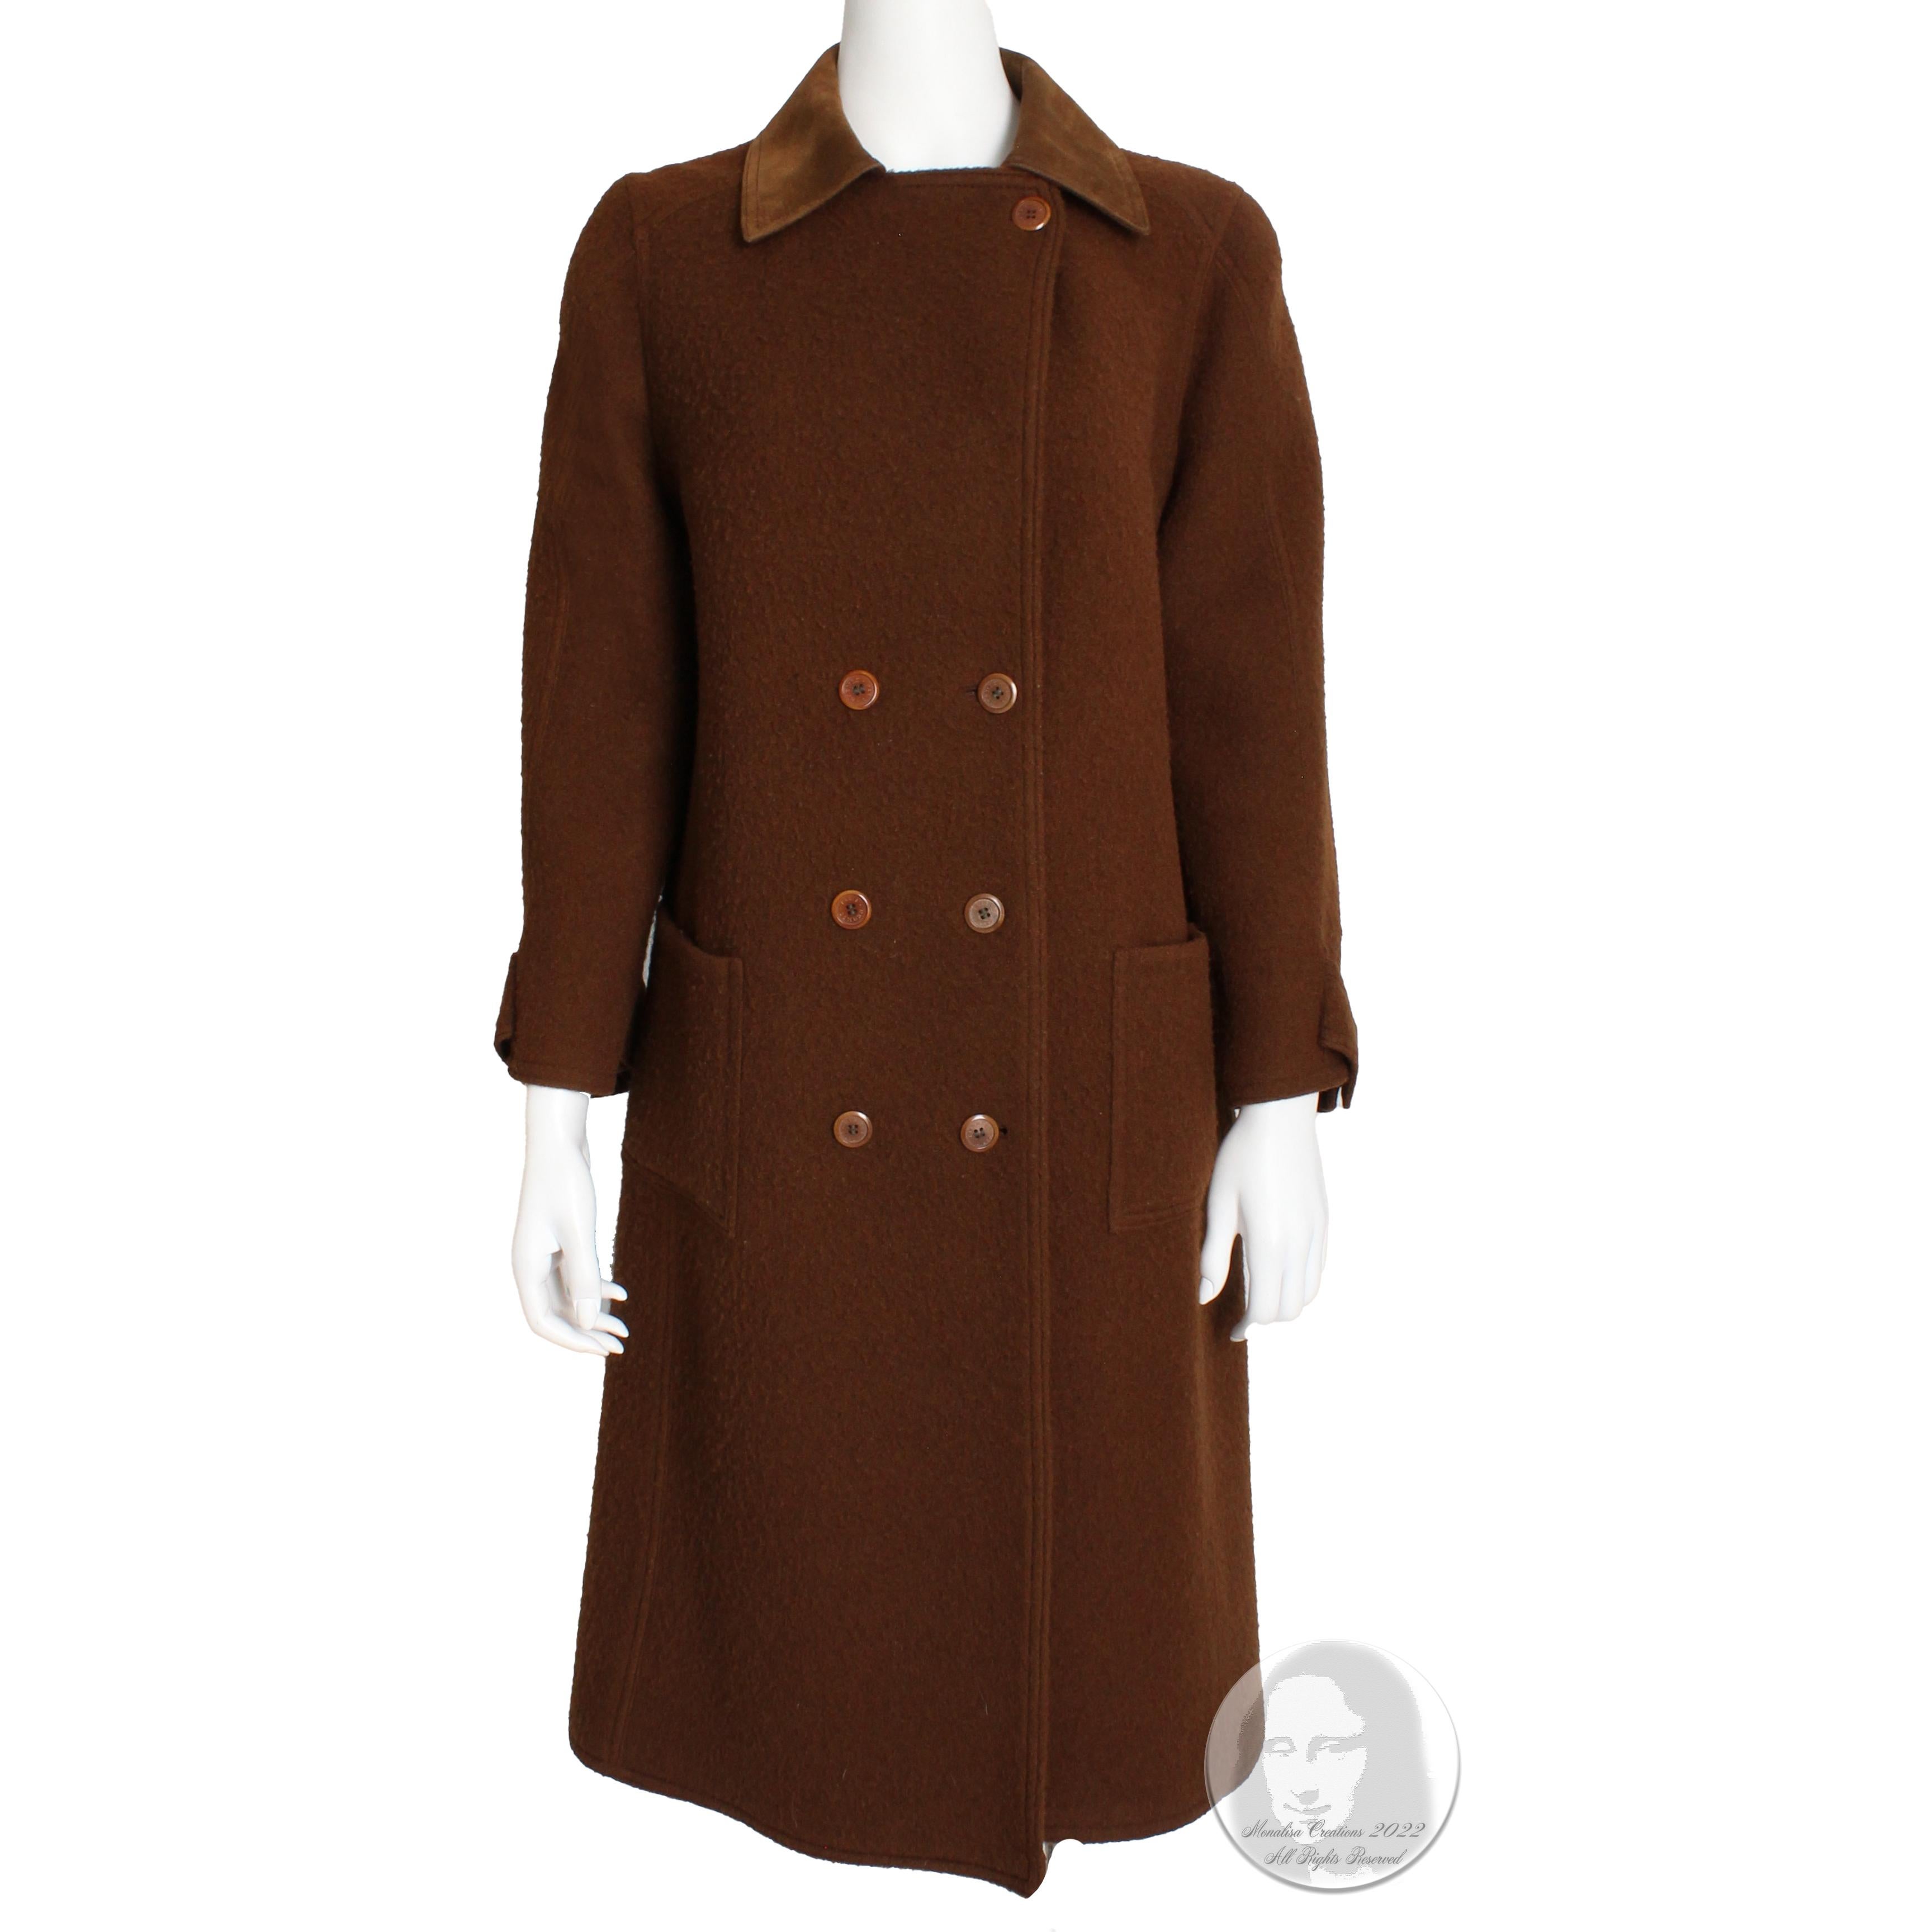 Hermes Brown Double Breasted Suede Leather Trim Trench Style Wool Coat, 1970s In Good Condition For Sale In Port Saint Lucie, FL